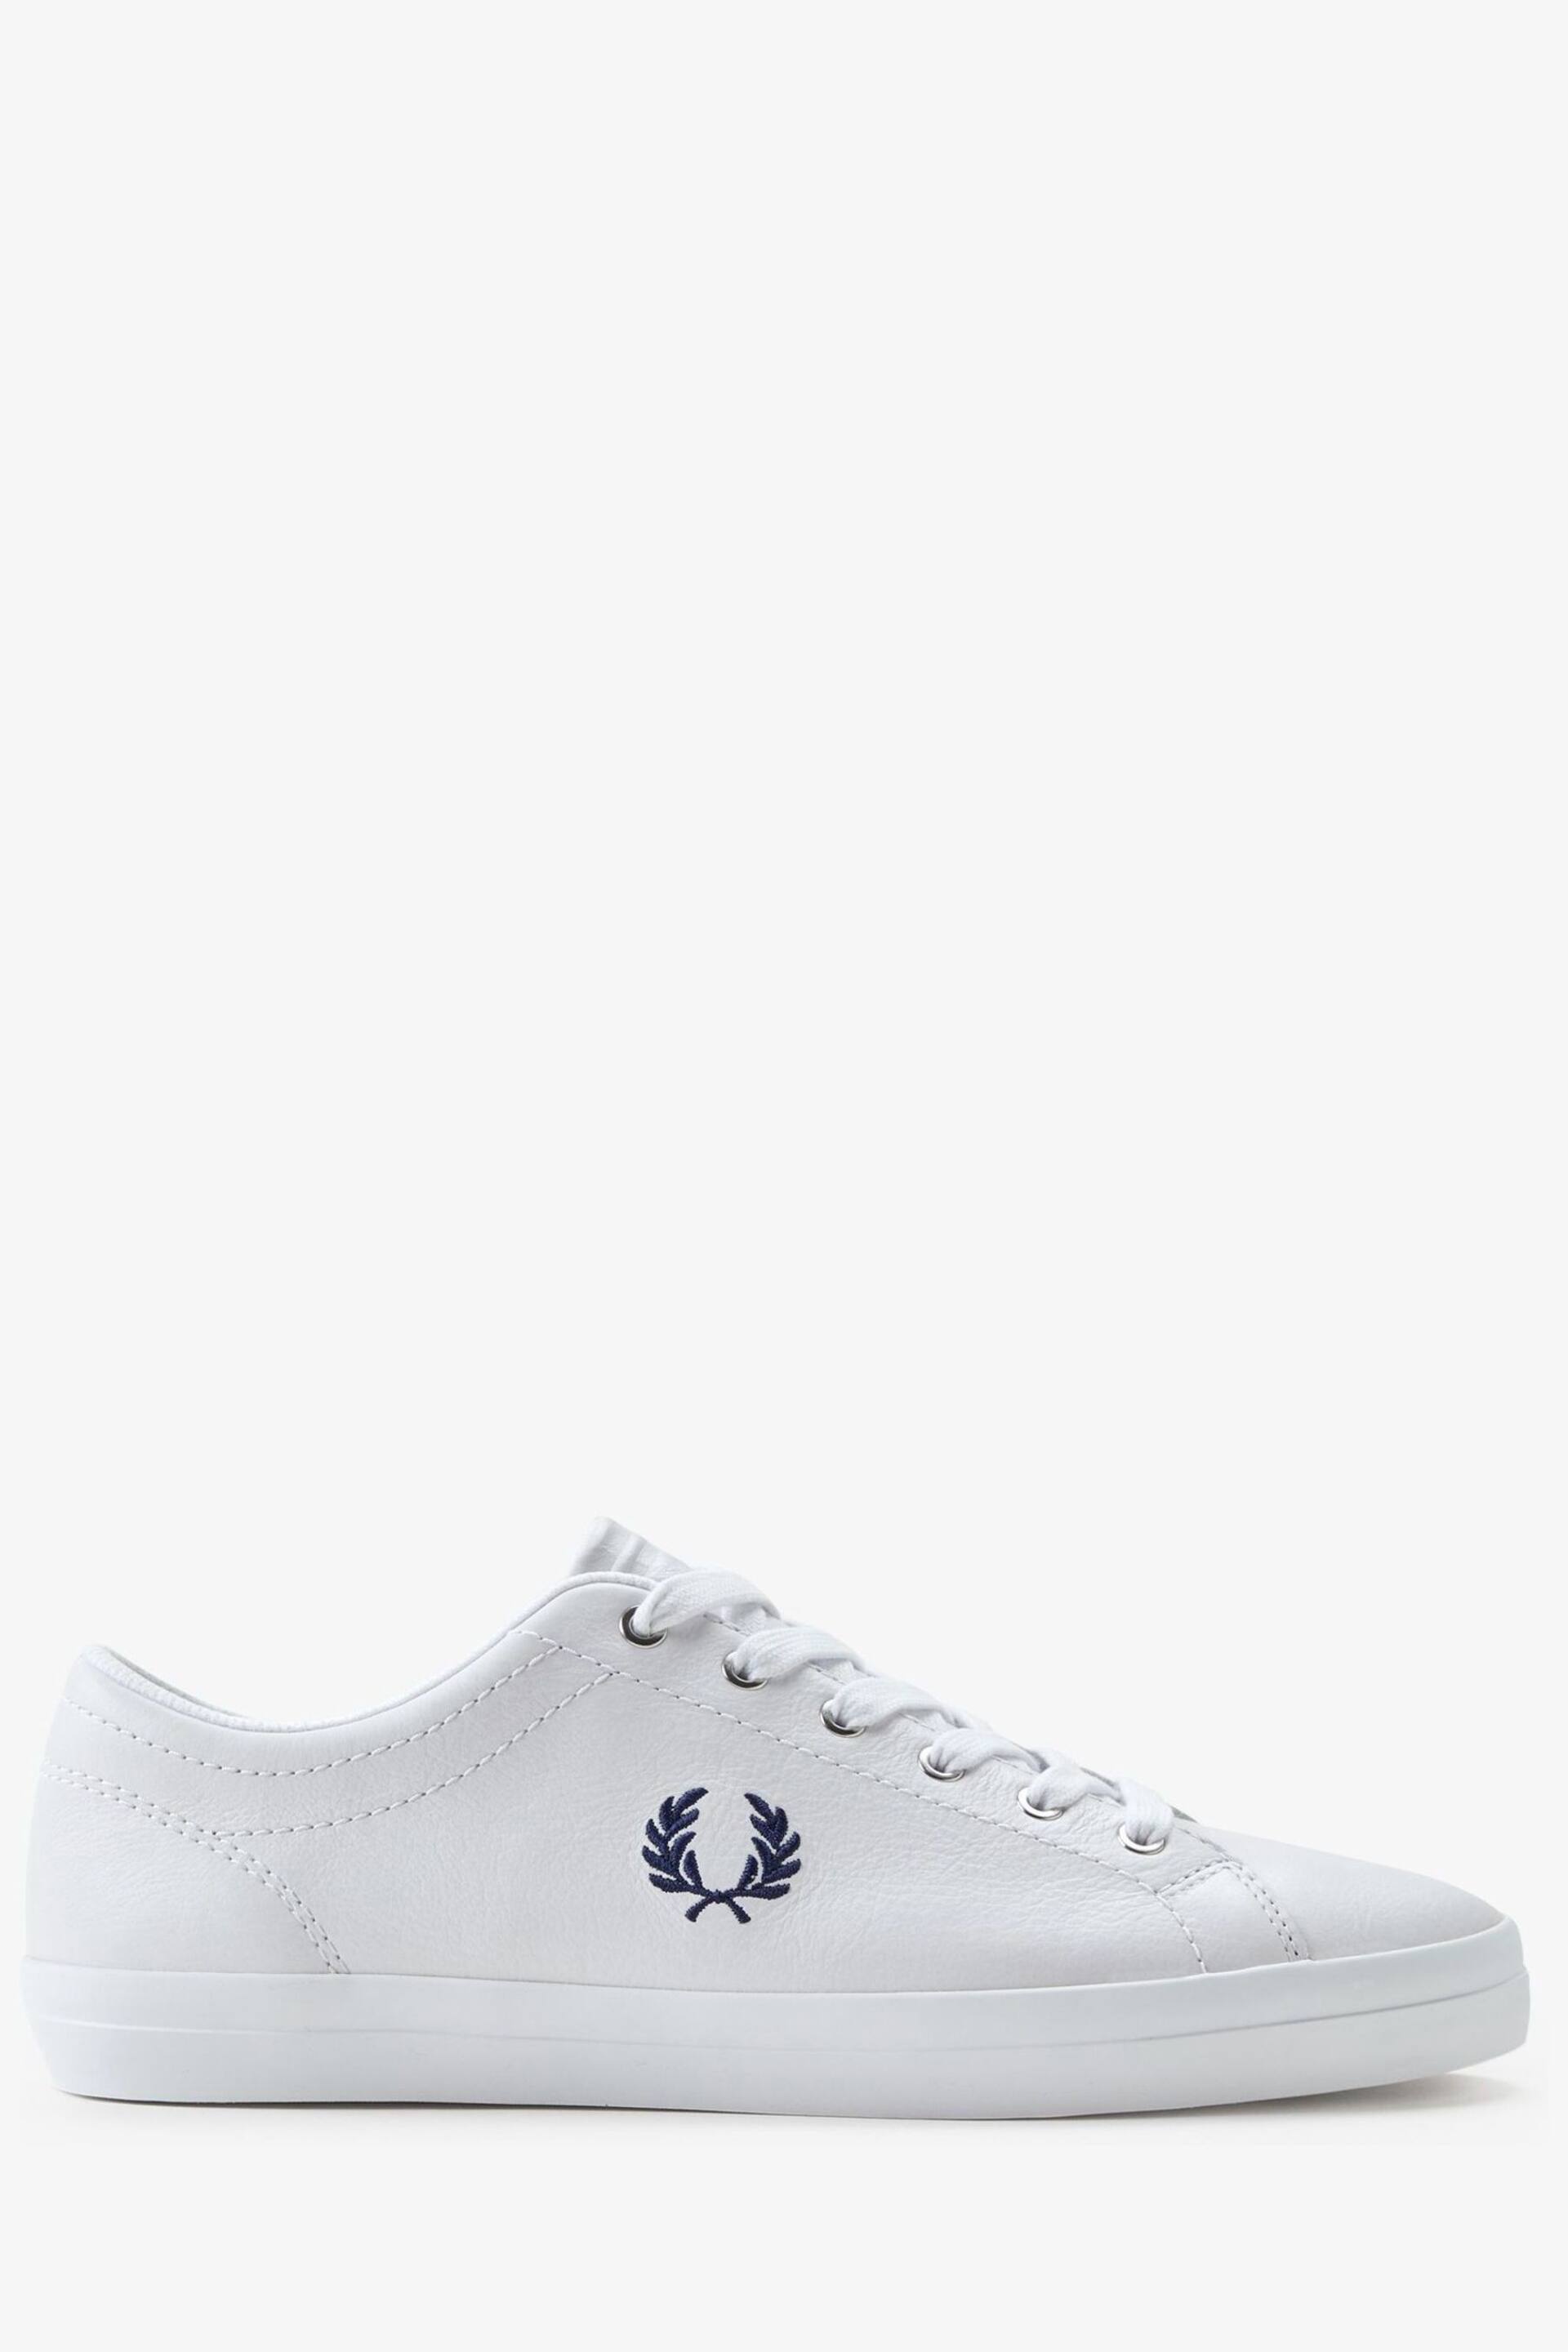 Fred Perry Baseline Tennis Trainers - Image 1 of 6